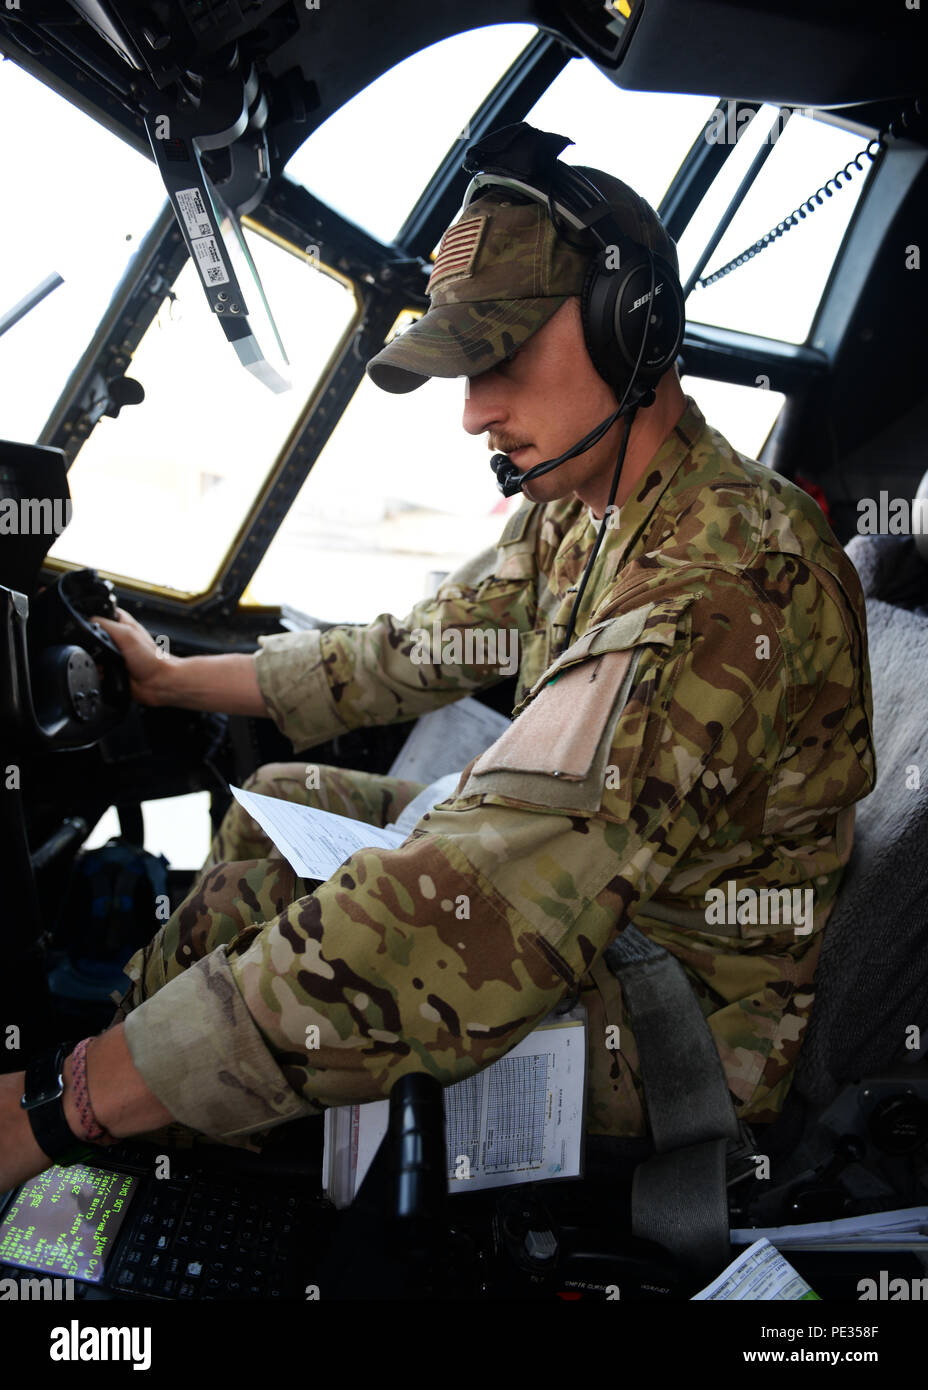 U.S. Air Force Capt. Matt Buchholtz, 774th Expeditionary Airlift Squadron C-130J Super Hercules pilot, turns on controls in preparation for take-off Sept. 3, 2015, at Al Udeid Air Base, Qatar. Buchholtz and his team, who are deployed from Little Rock Air Force Base, Ark., fly various combat missions throughout Afghanistan supporting missions ranging from medical evacuations to cargo and passenger transports. (U.S. Air Force photo by Senior Airman Cierra Presentado/Released) Stock Photo